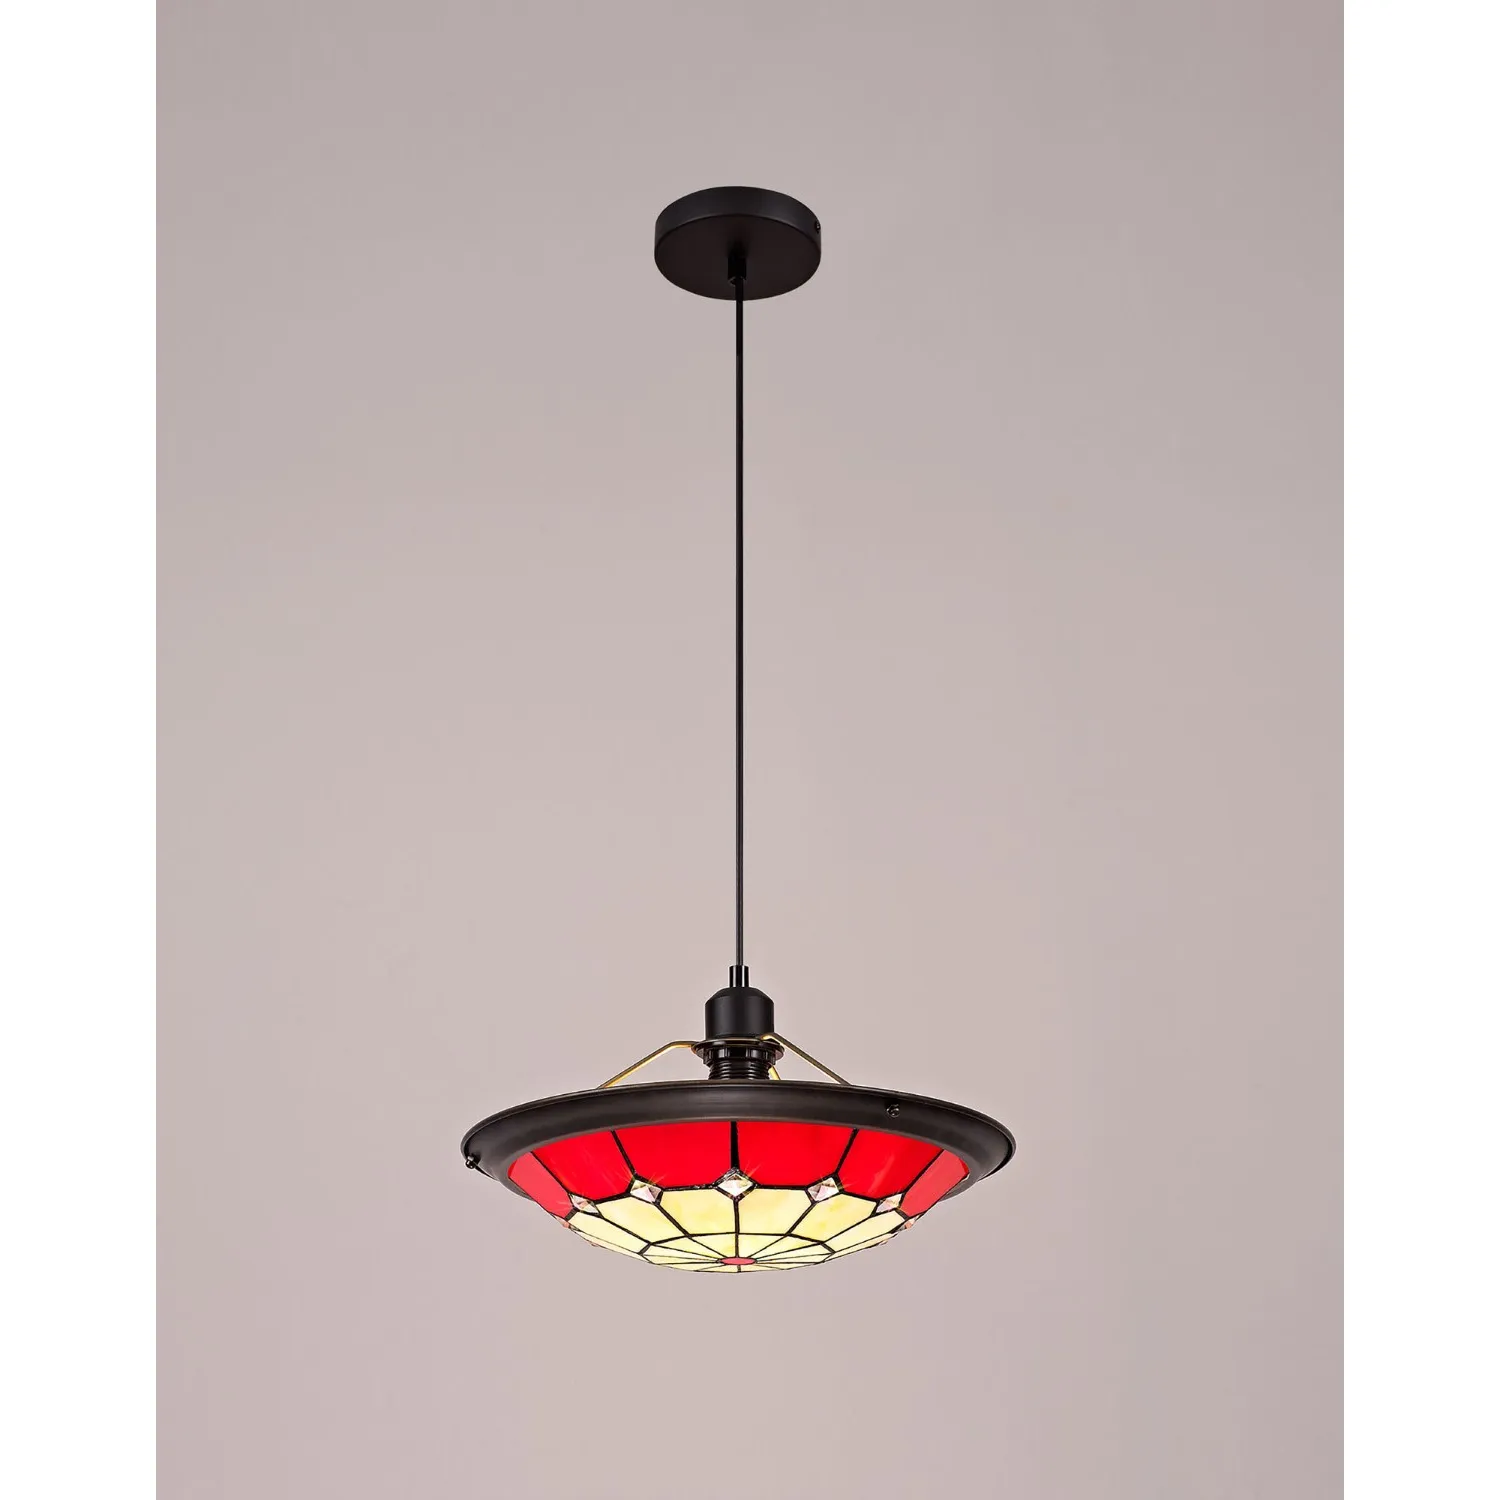 Hampshire 1 Light Pendant E27 With 35cm Tiffany Shade, Cream Red Clear Crystal Centre Aged Antique Brass Trim Black